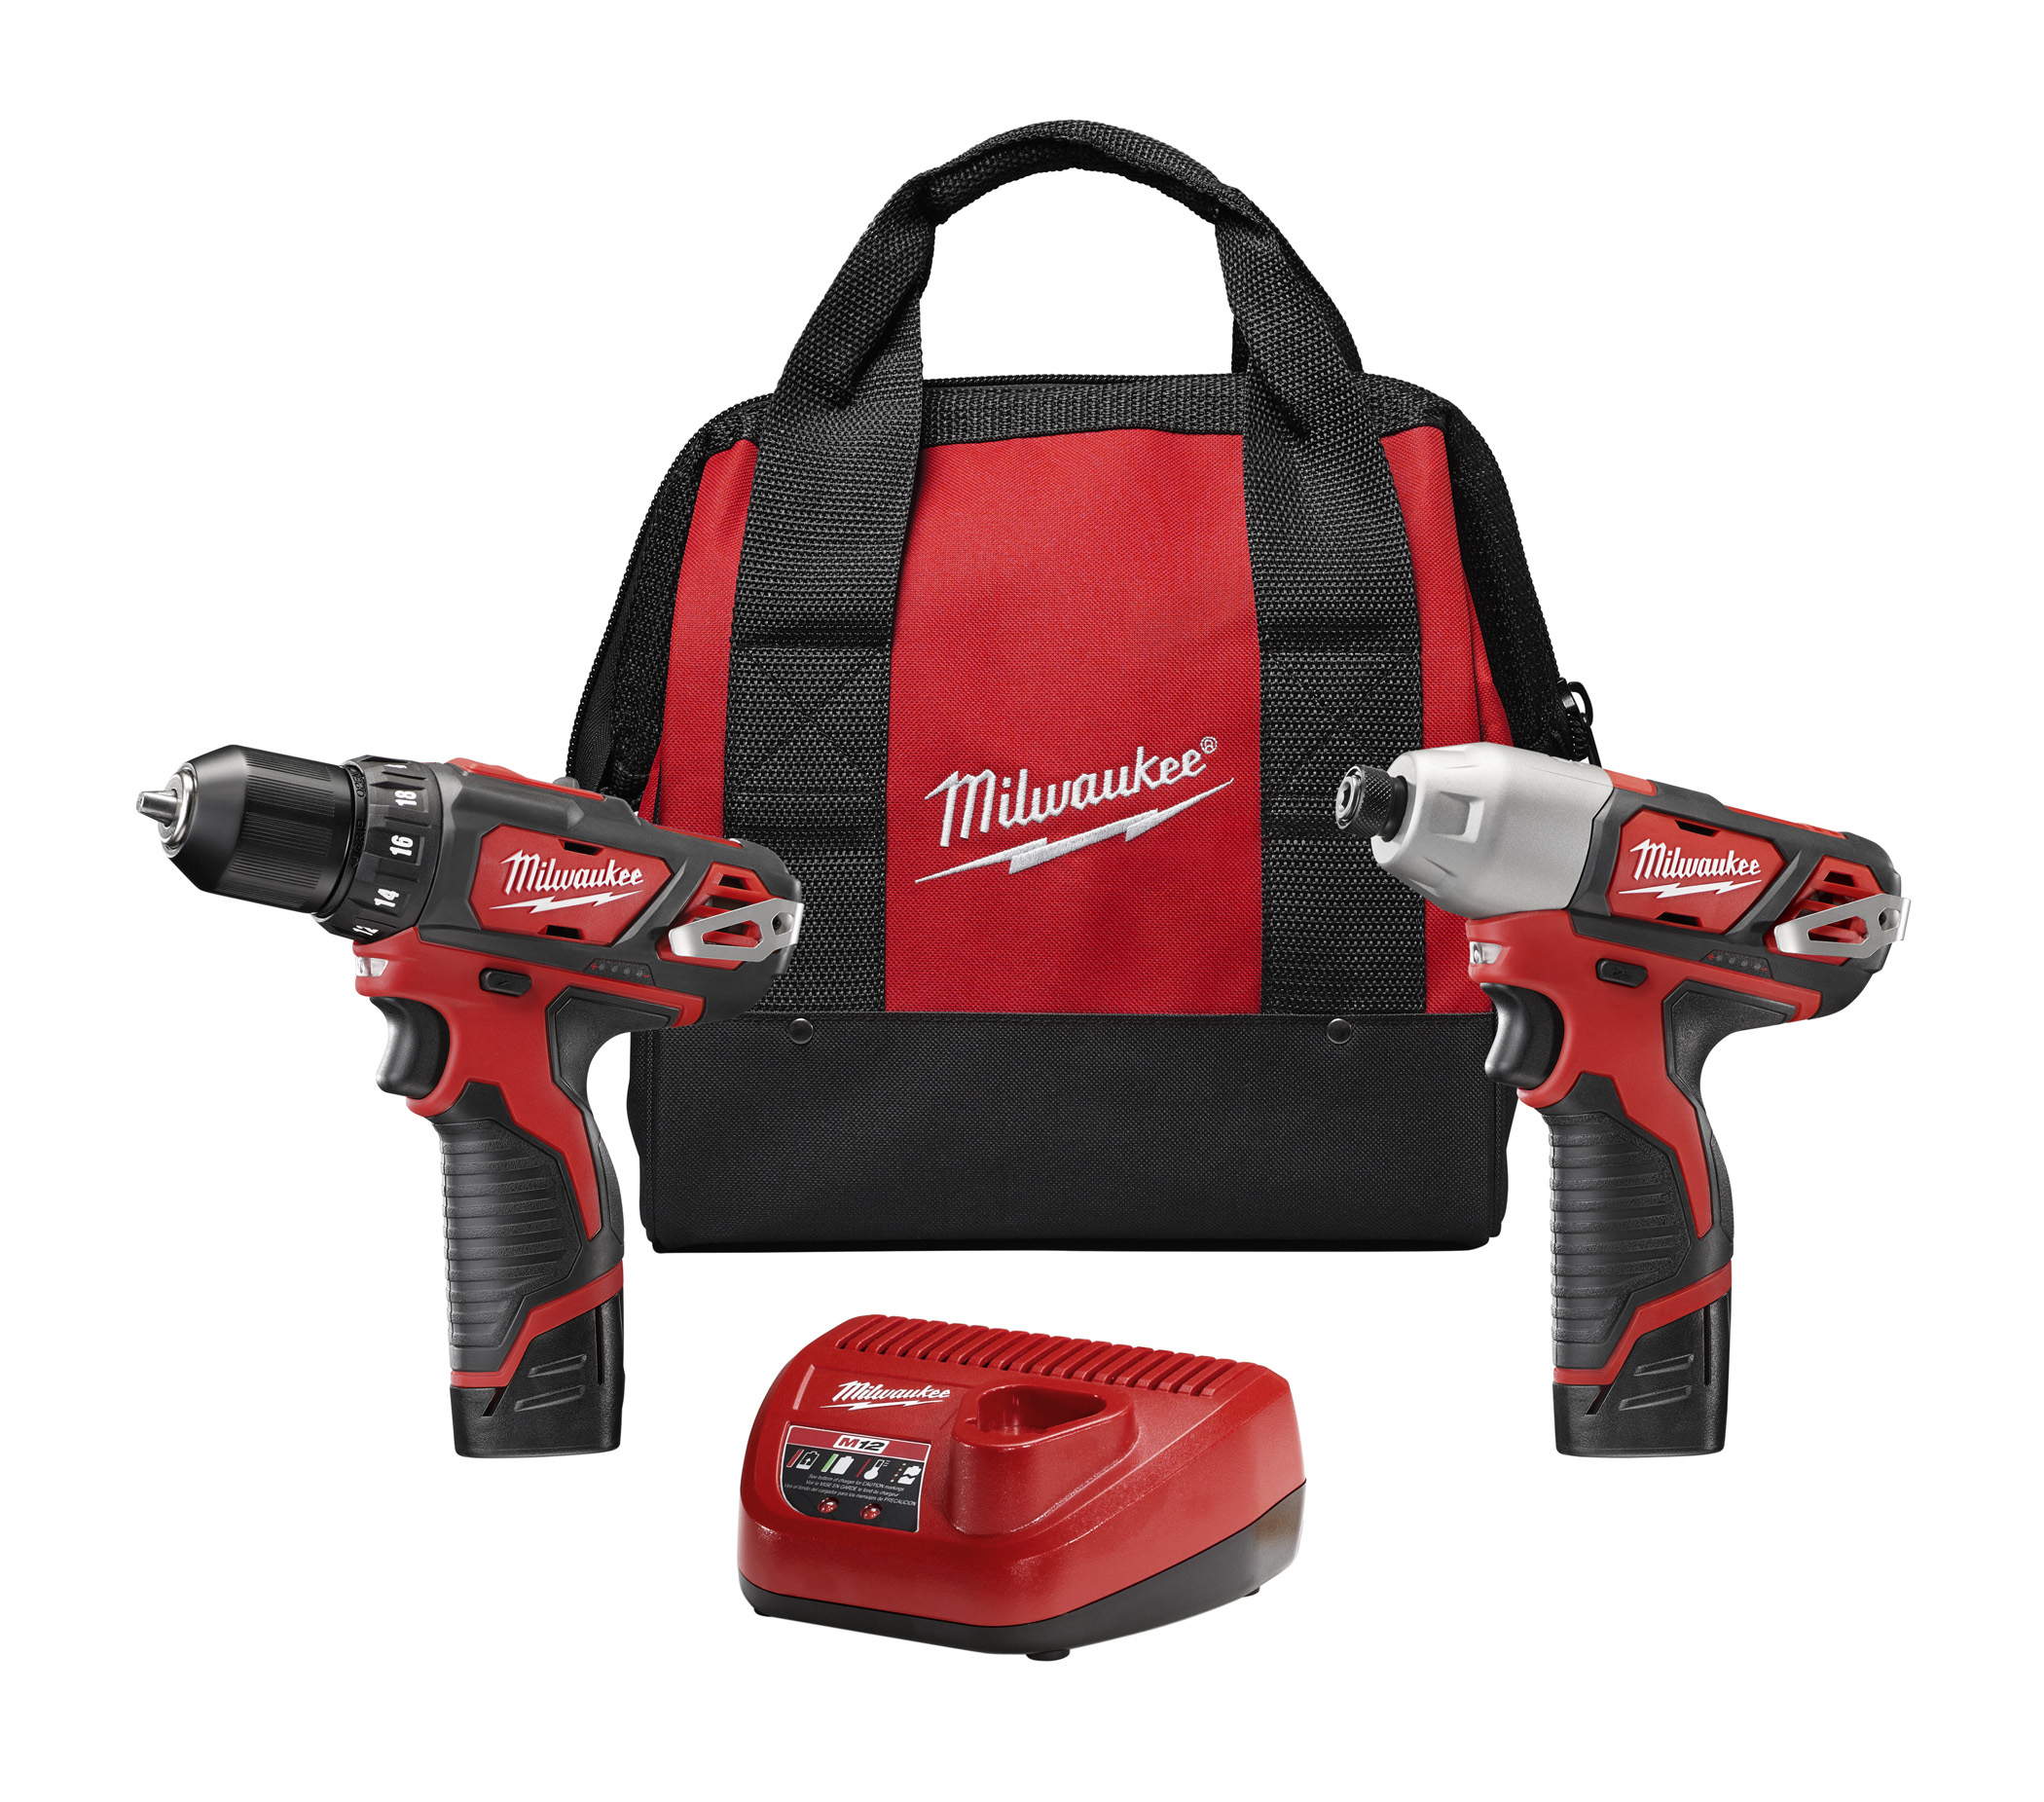 M12 12-Volt Lithium-Ion Cordless Drill Driver/Impact Driver Combo Kit - 2 Tool